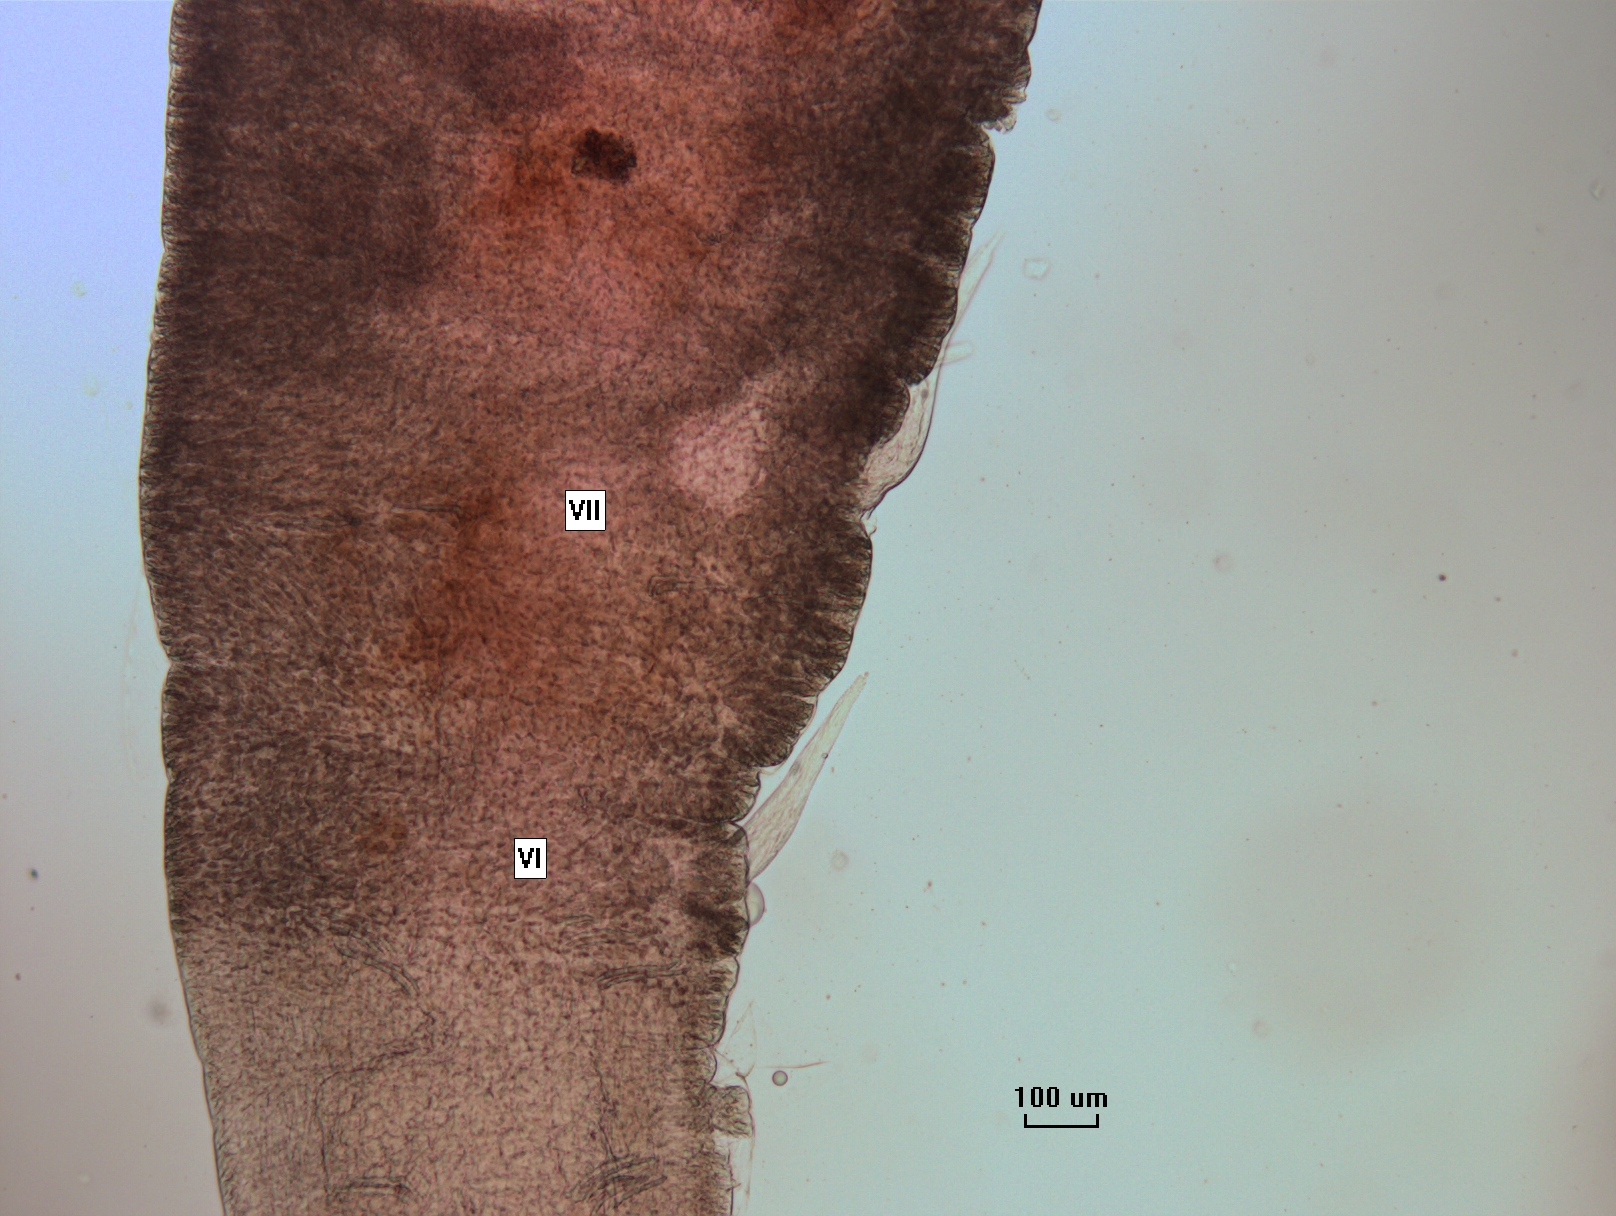 photomicrograph showing the clitellum of a worm with two sets of two reproductive structures protruding from the body and tapering to points